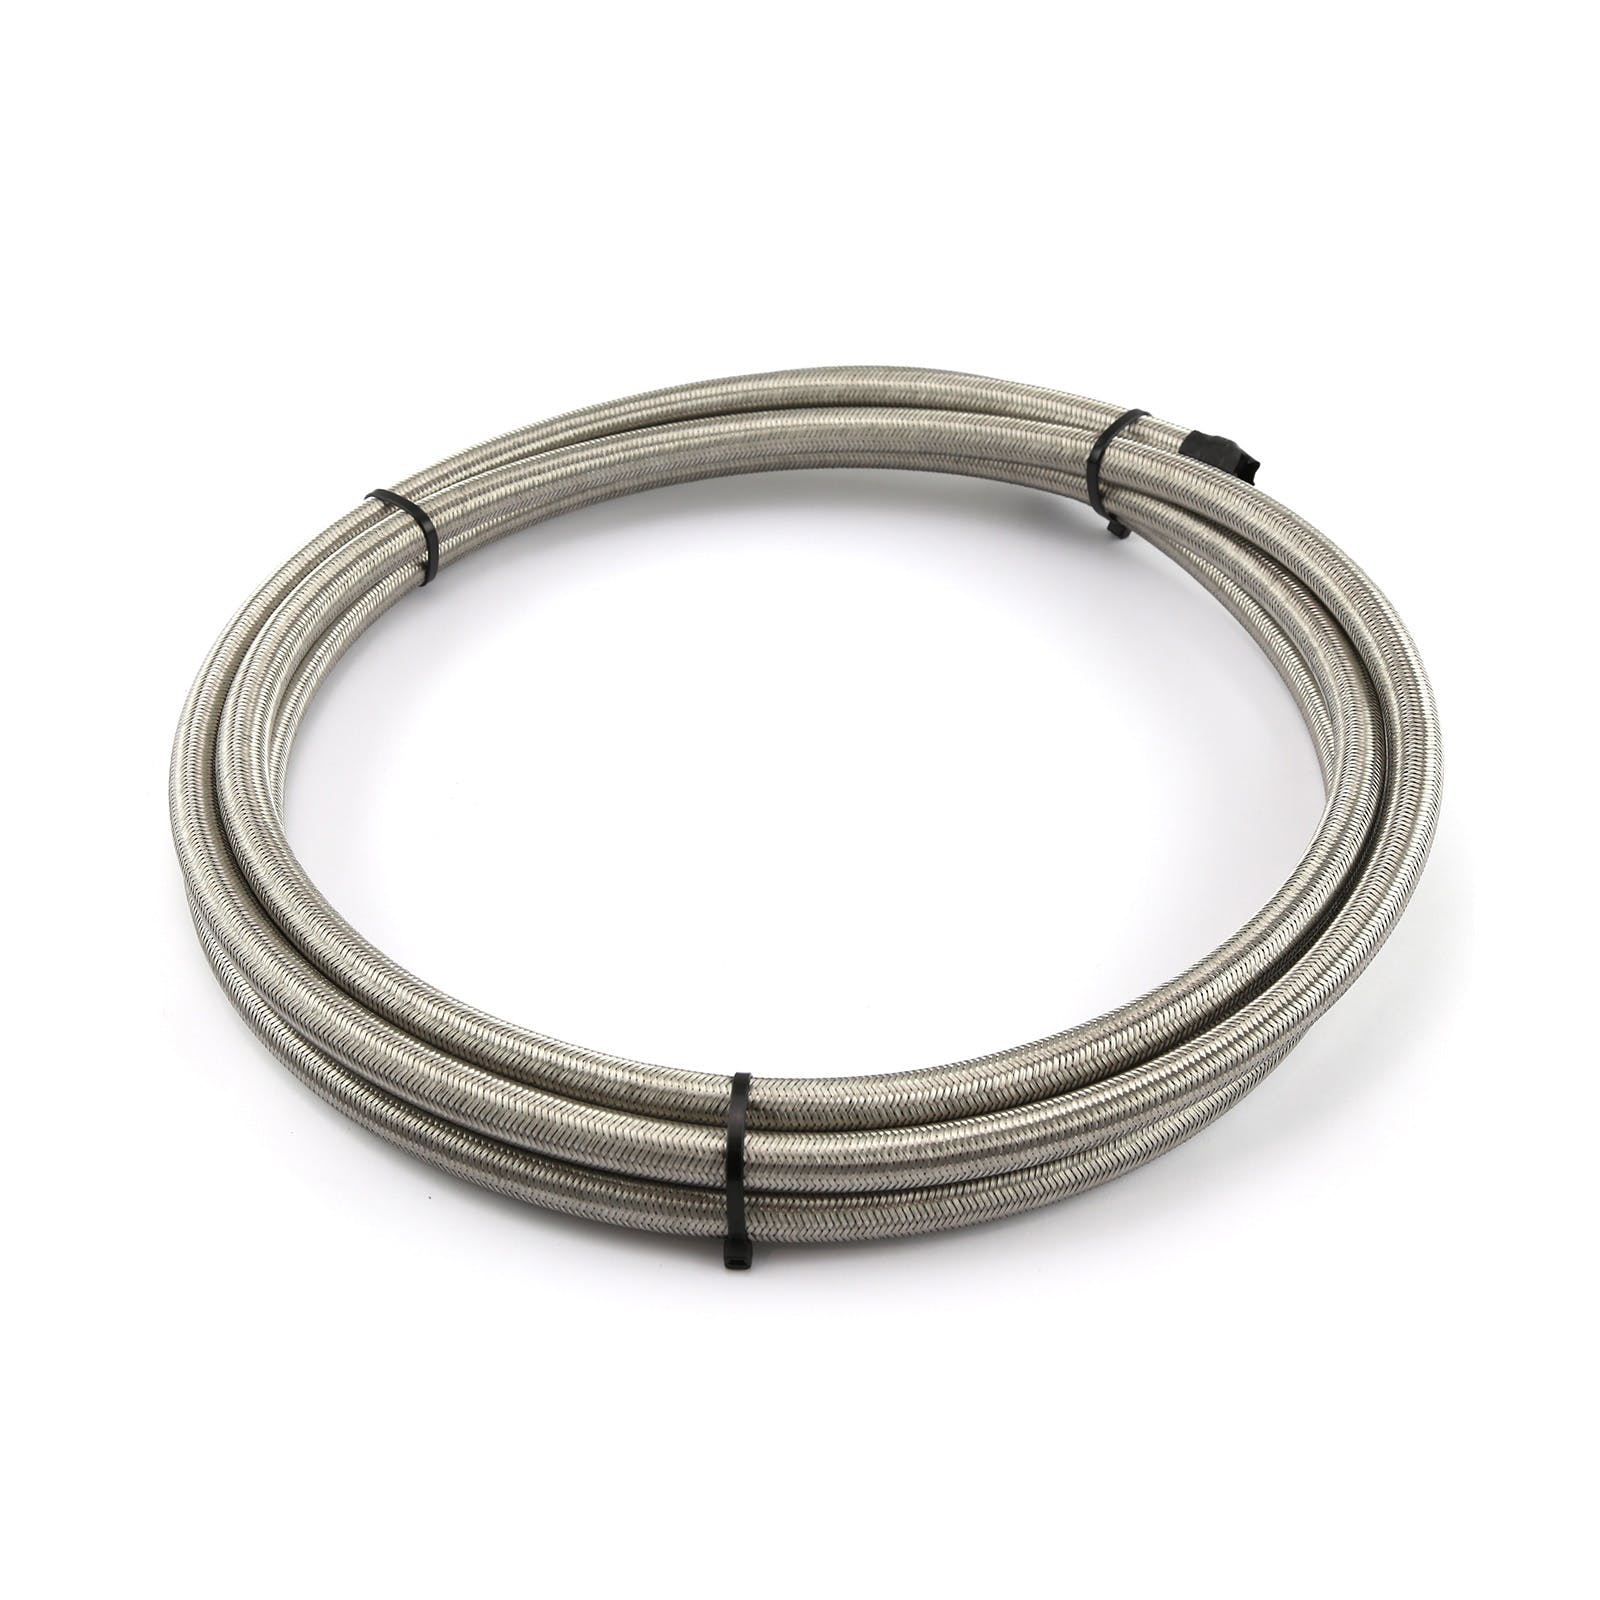 Speedmaster PCE339.1014 -10 AN 9/16 Stainless Steel Fuel Oil Braided Hose Line - 5m / 16.4ft